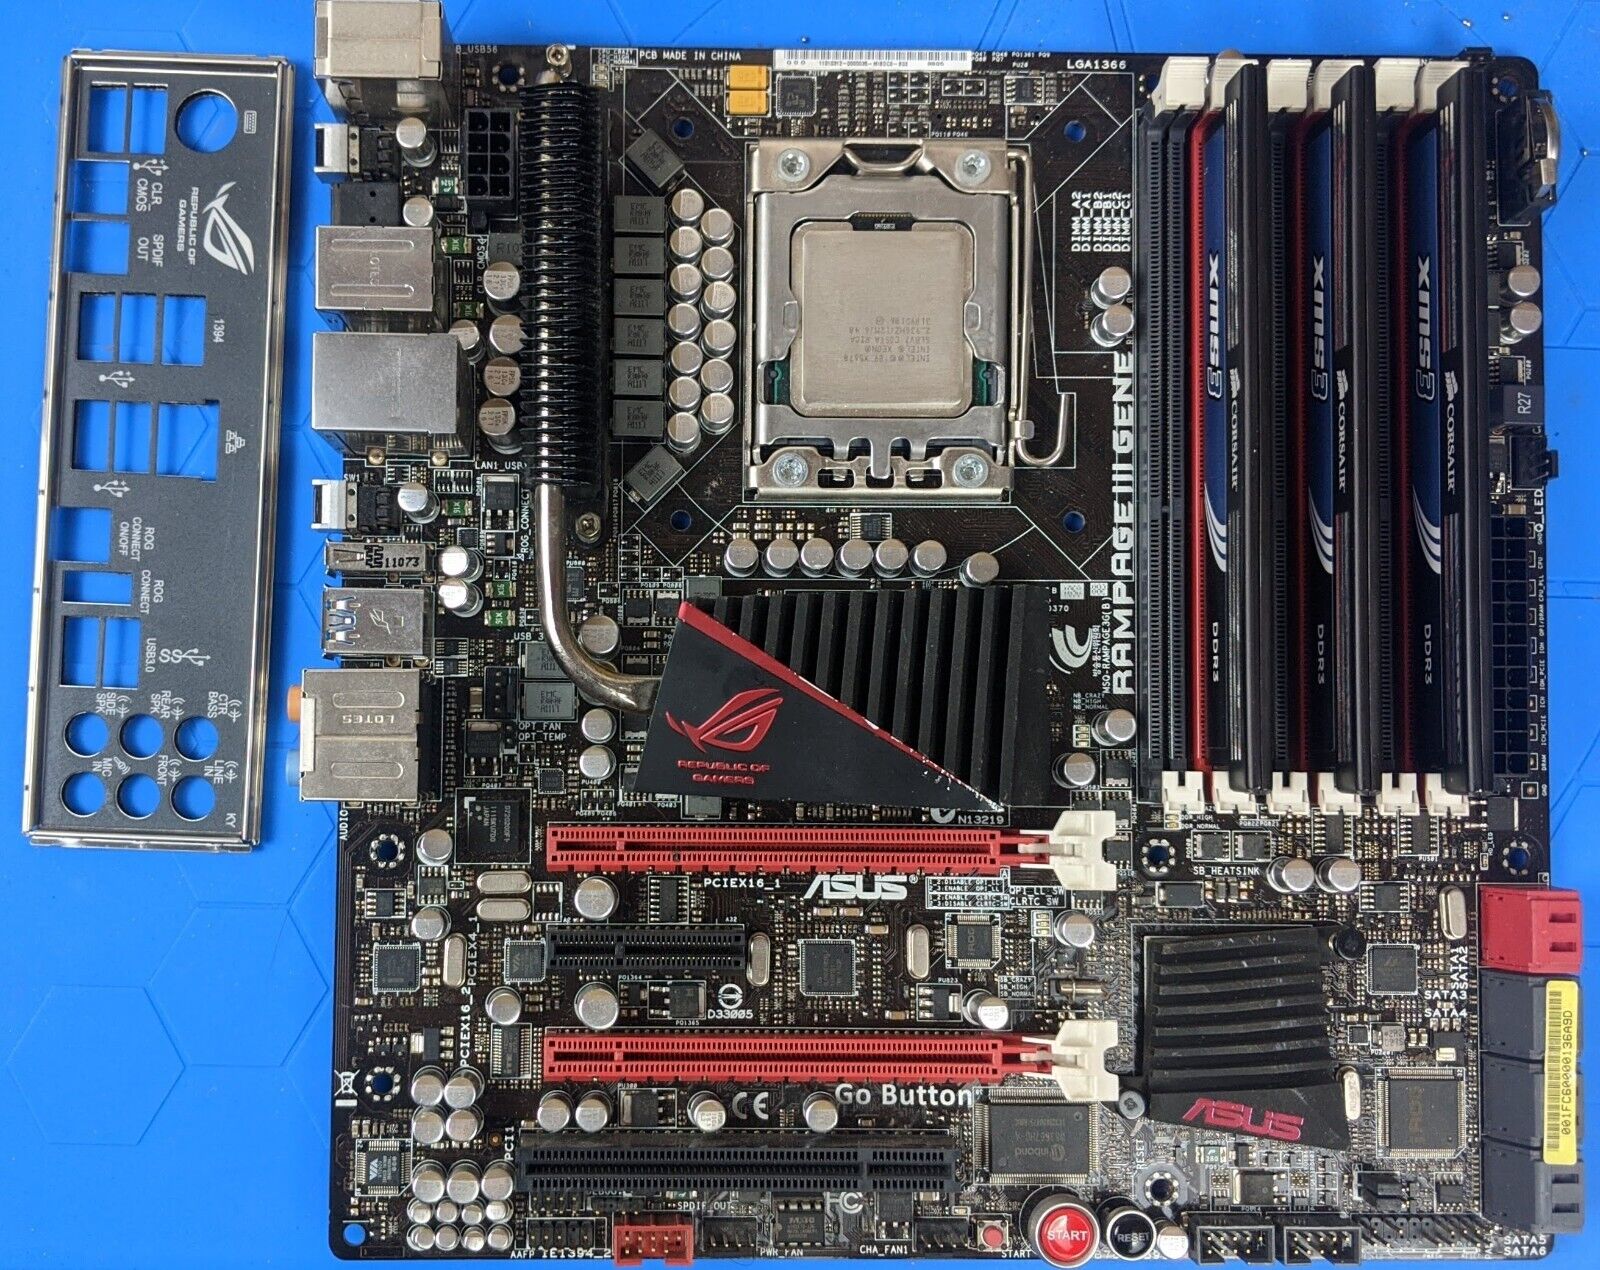 ASUS Rampage III Gene Intel X58 mATX Motherboard w/ X5670 - Only 3 DIMMs Boots